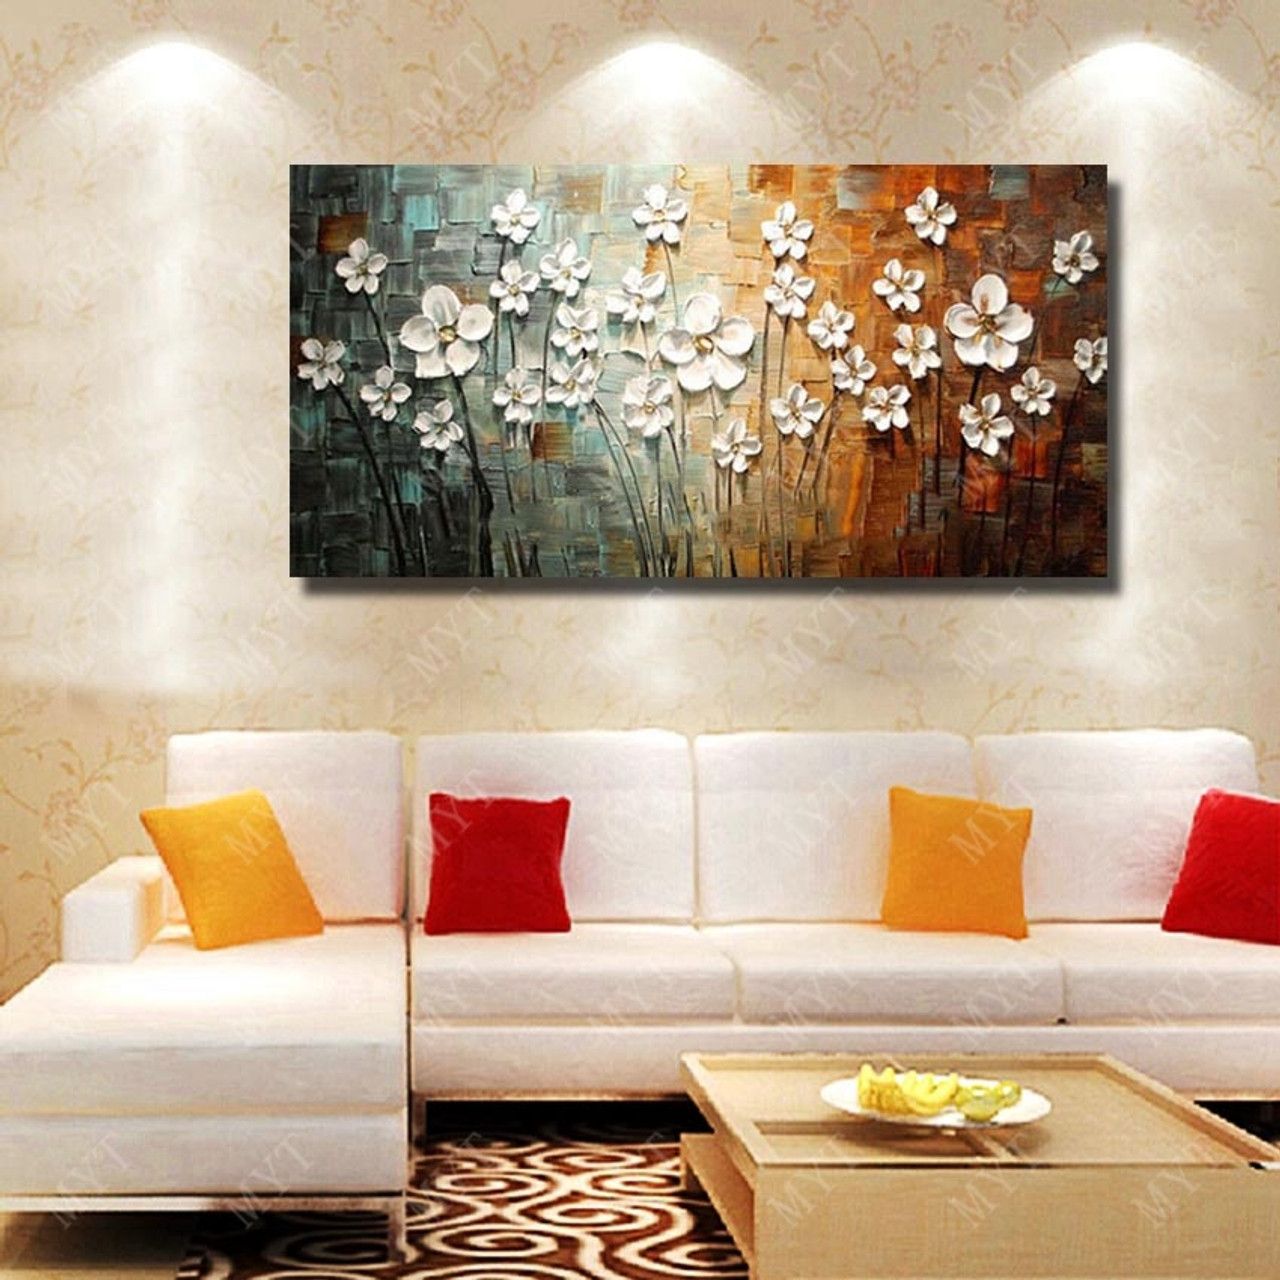 Chinese Wall Art Modern Living Room Wall Decor Flower Painting Large